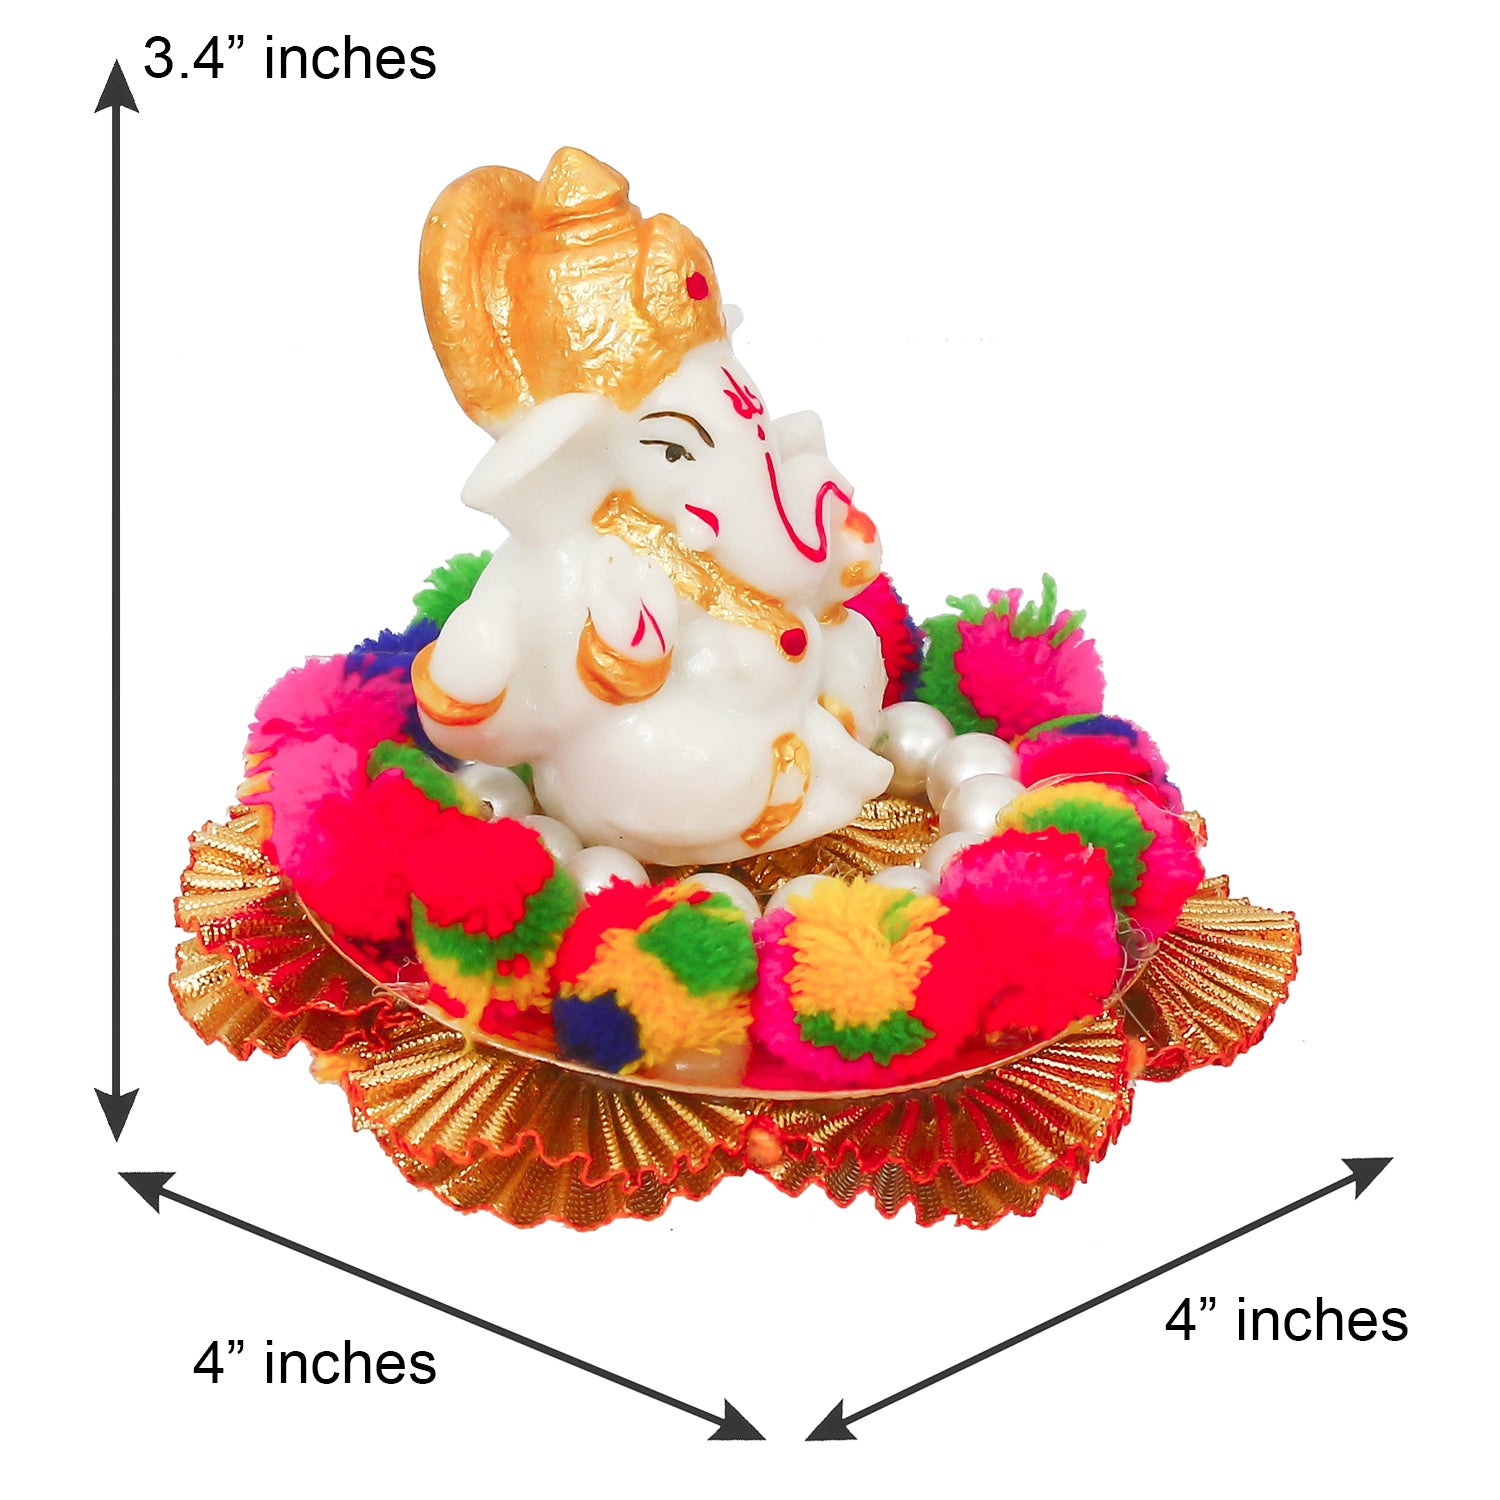 Lord Ganesha Idol On Decorative Handicrafted Plate For Home And Car Dashboard 2